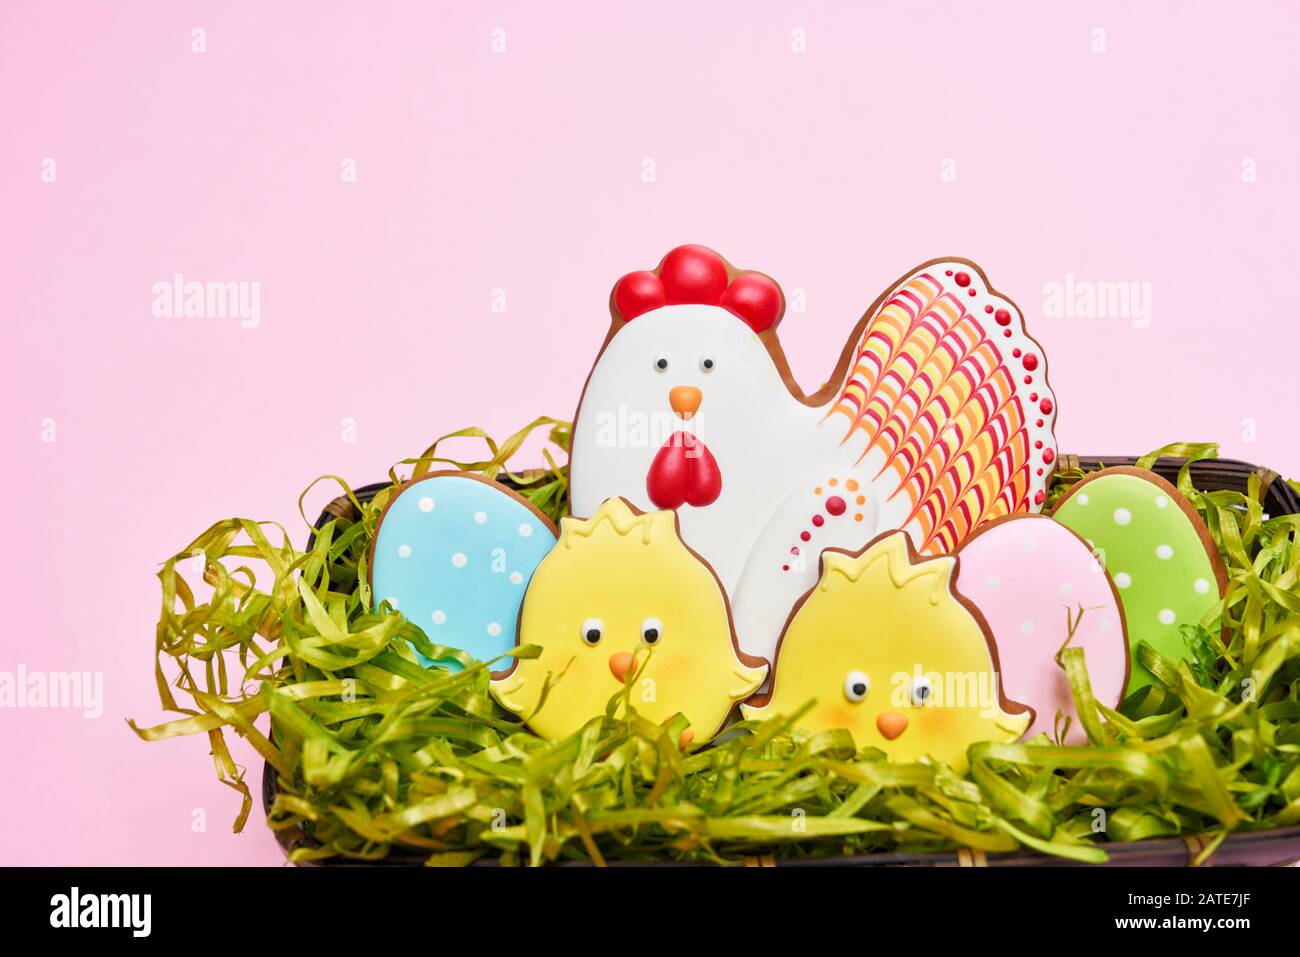 From above view of glazed cookies in shape of lovely yellow chicks, chicken and colorful eggs lying in box with fake green grass isolated on pink background. Spring and easter holidays concept. Stock Photo